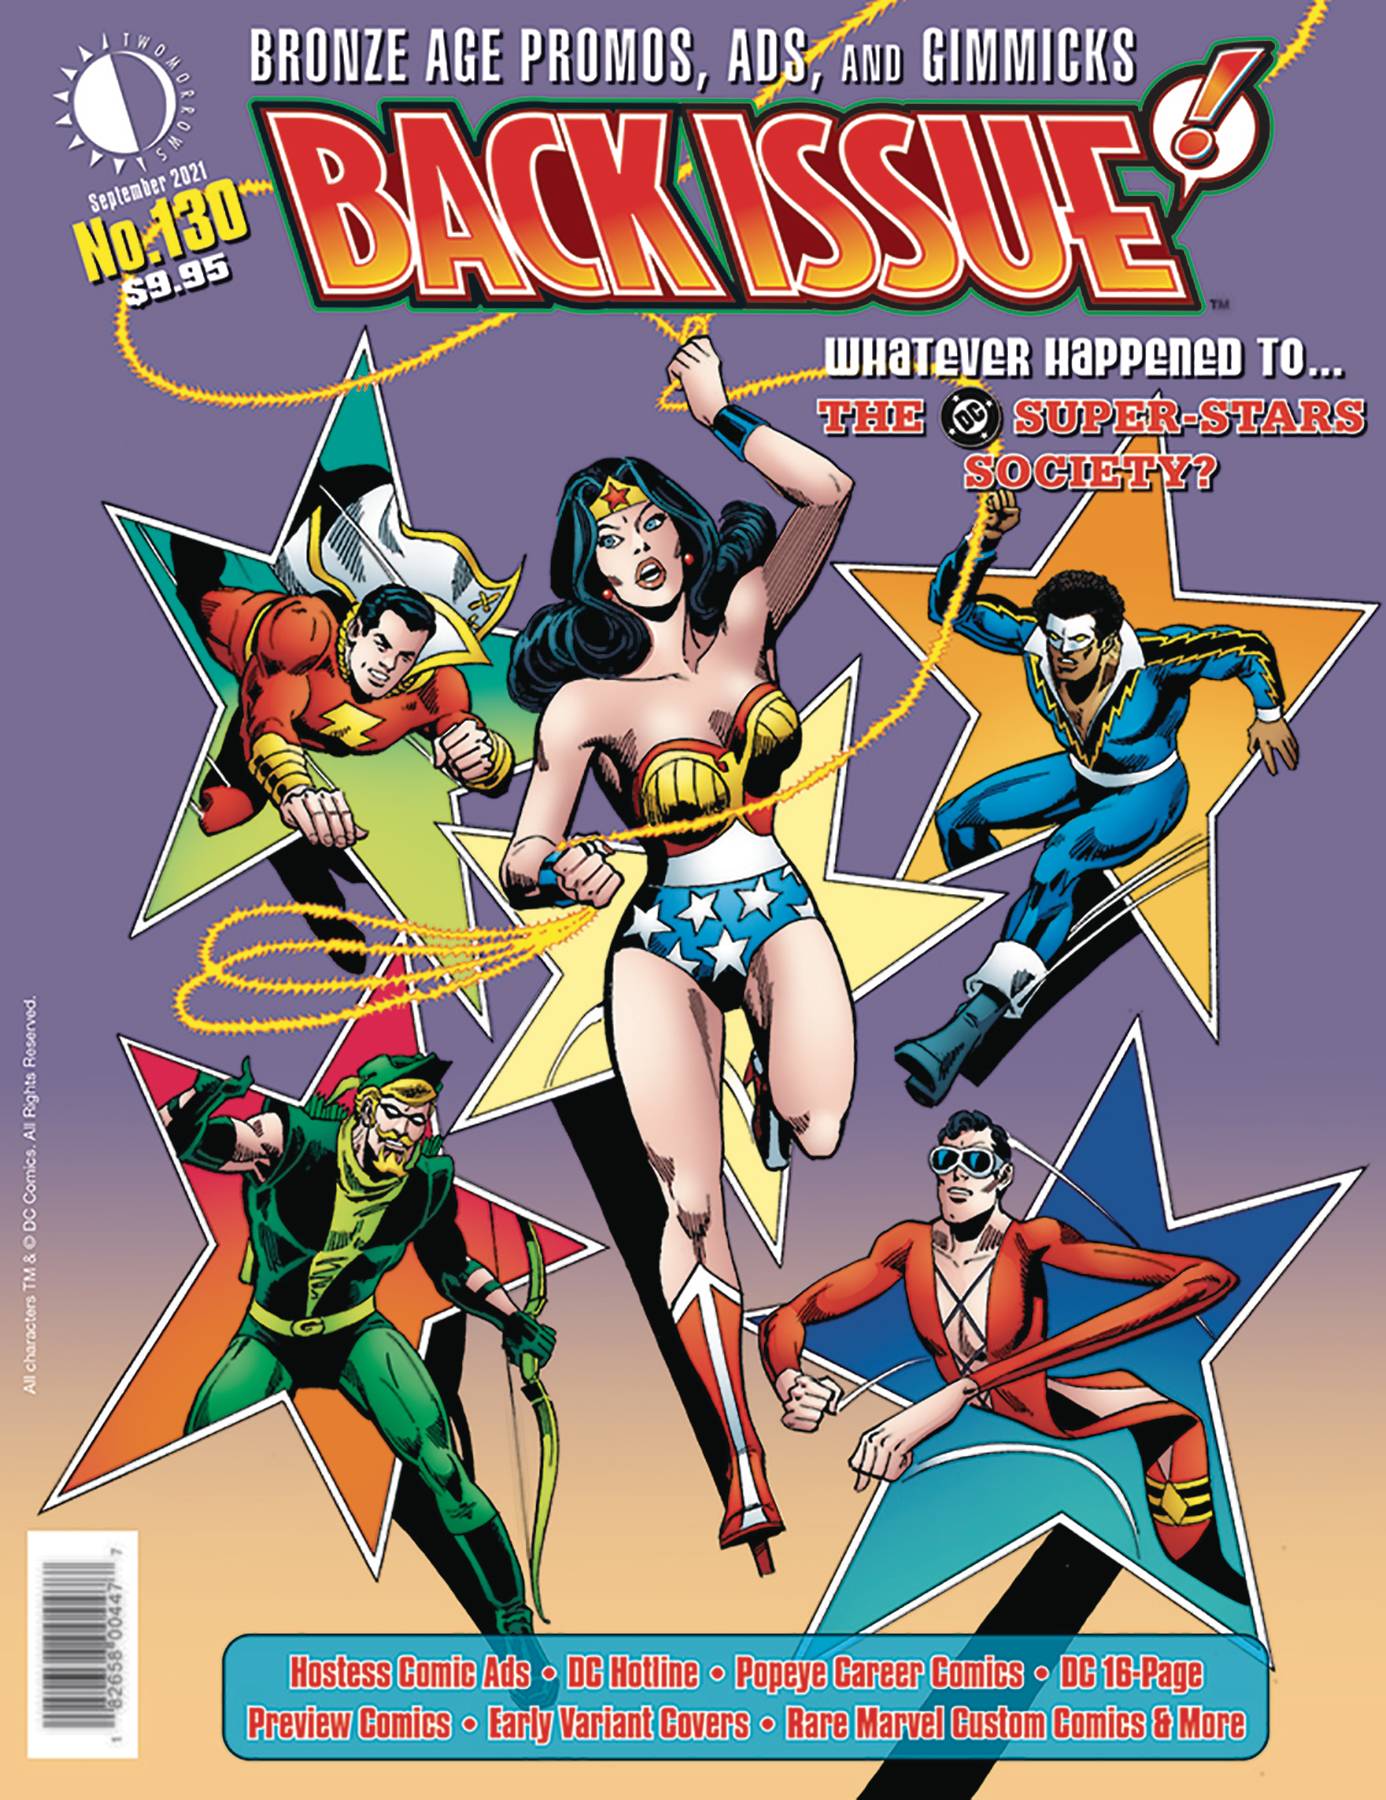 DC BACK-ISSUES